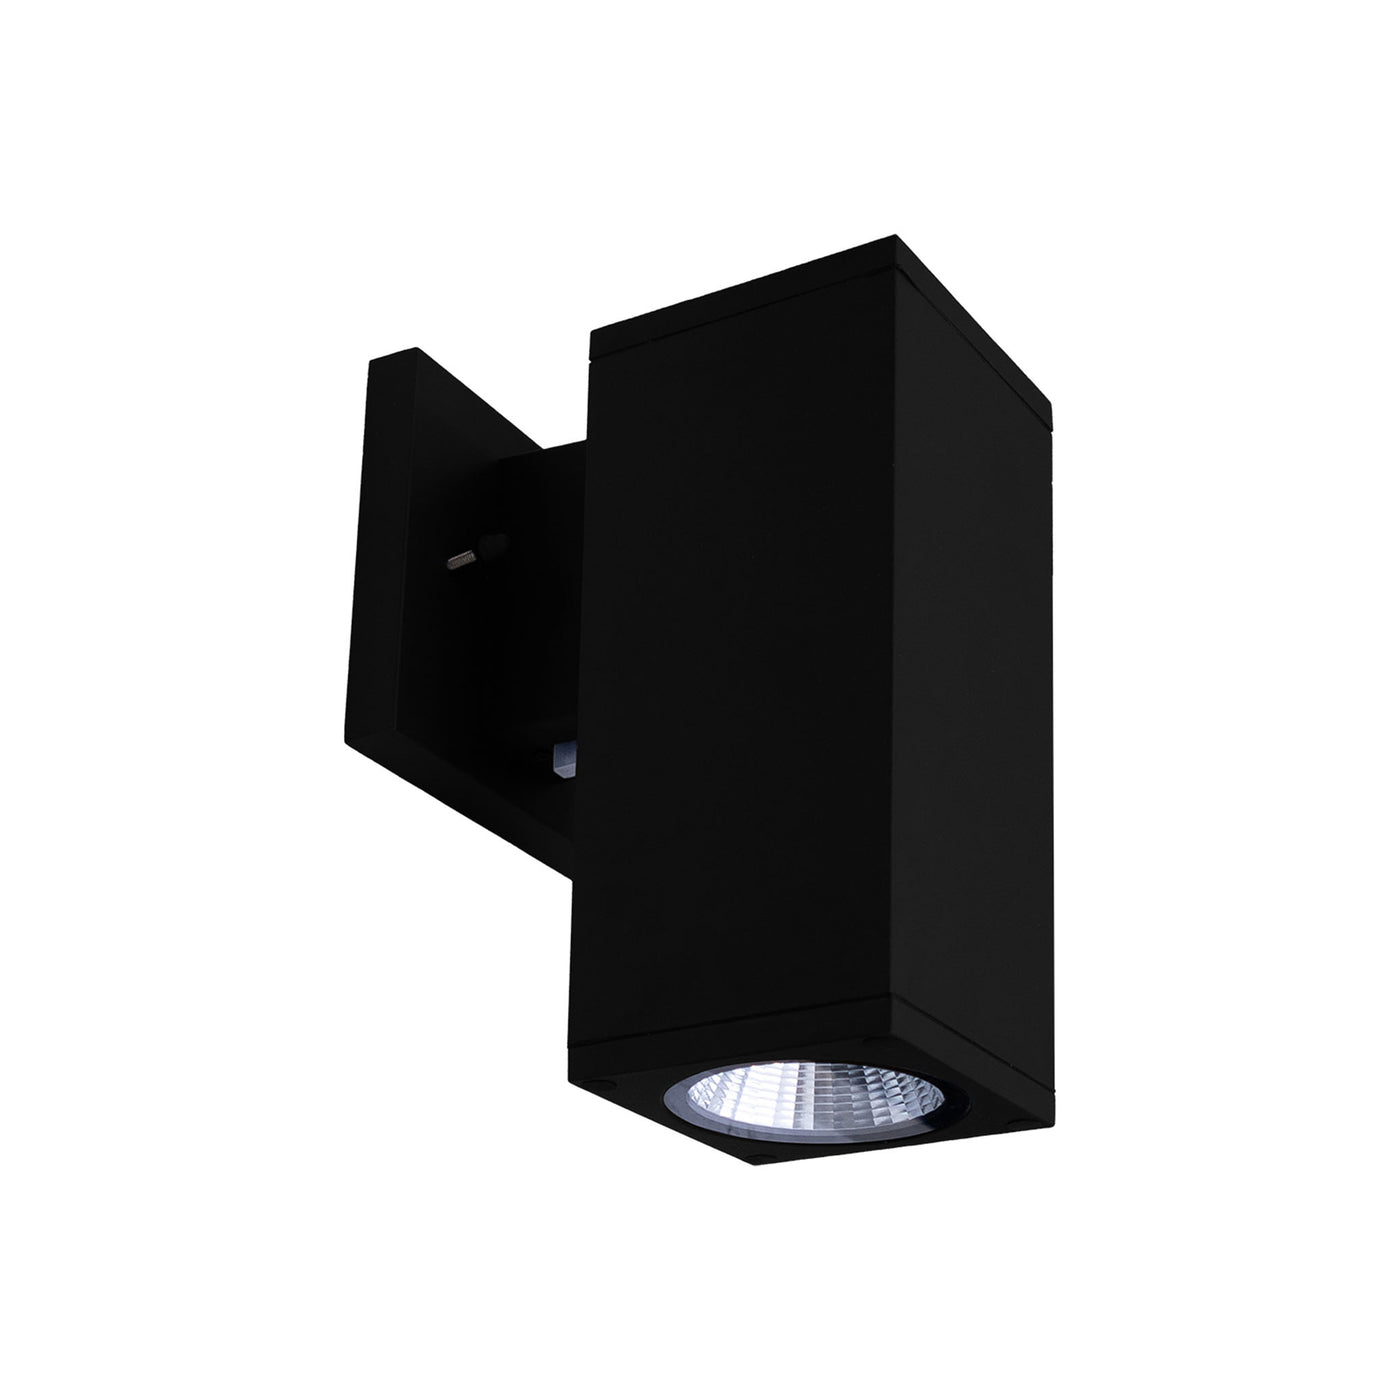 LED MCT Square Wall Mount 4" Cylinder Down Light, 960 Lumens, 12 Watt, 120 Volts, Selectable CCT, Available in Black, Bronze, Brushed Nickel, or White